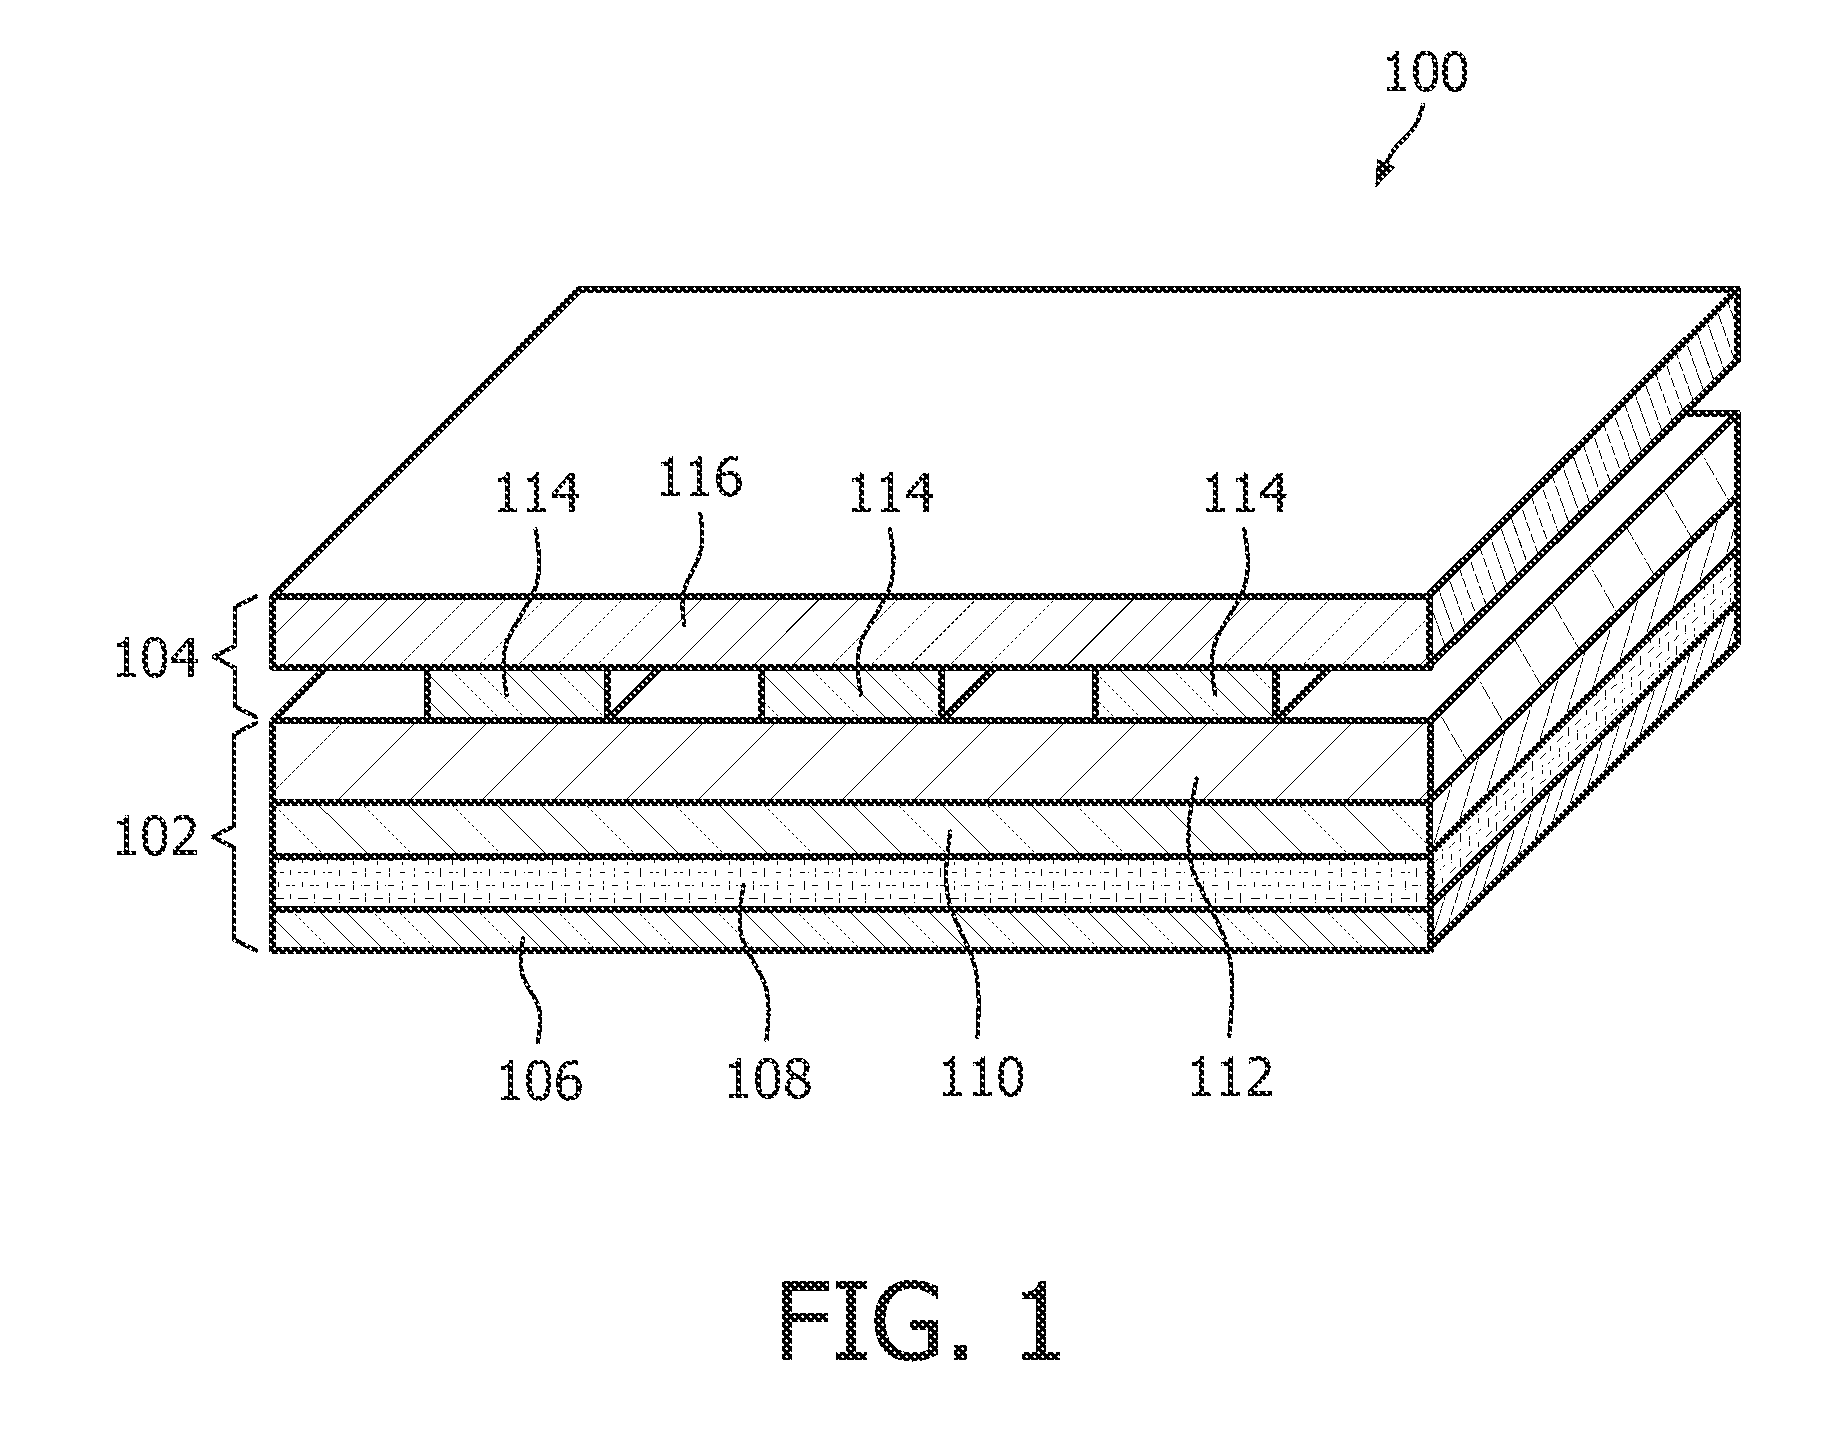 OLED device and an electronic circuit